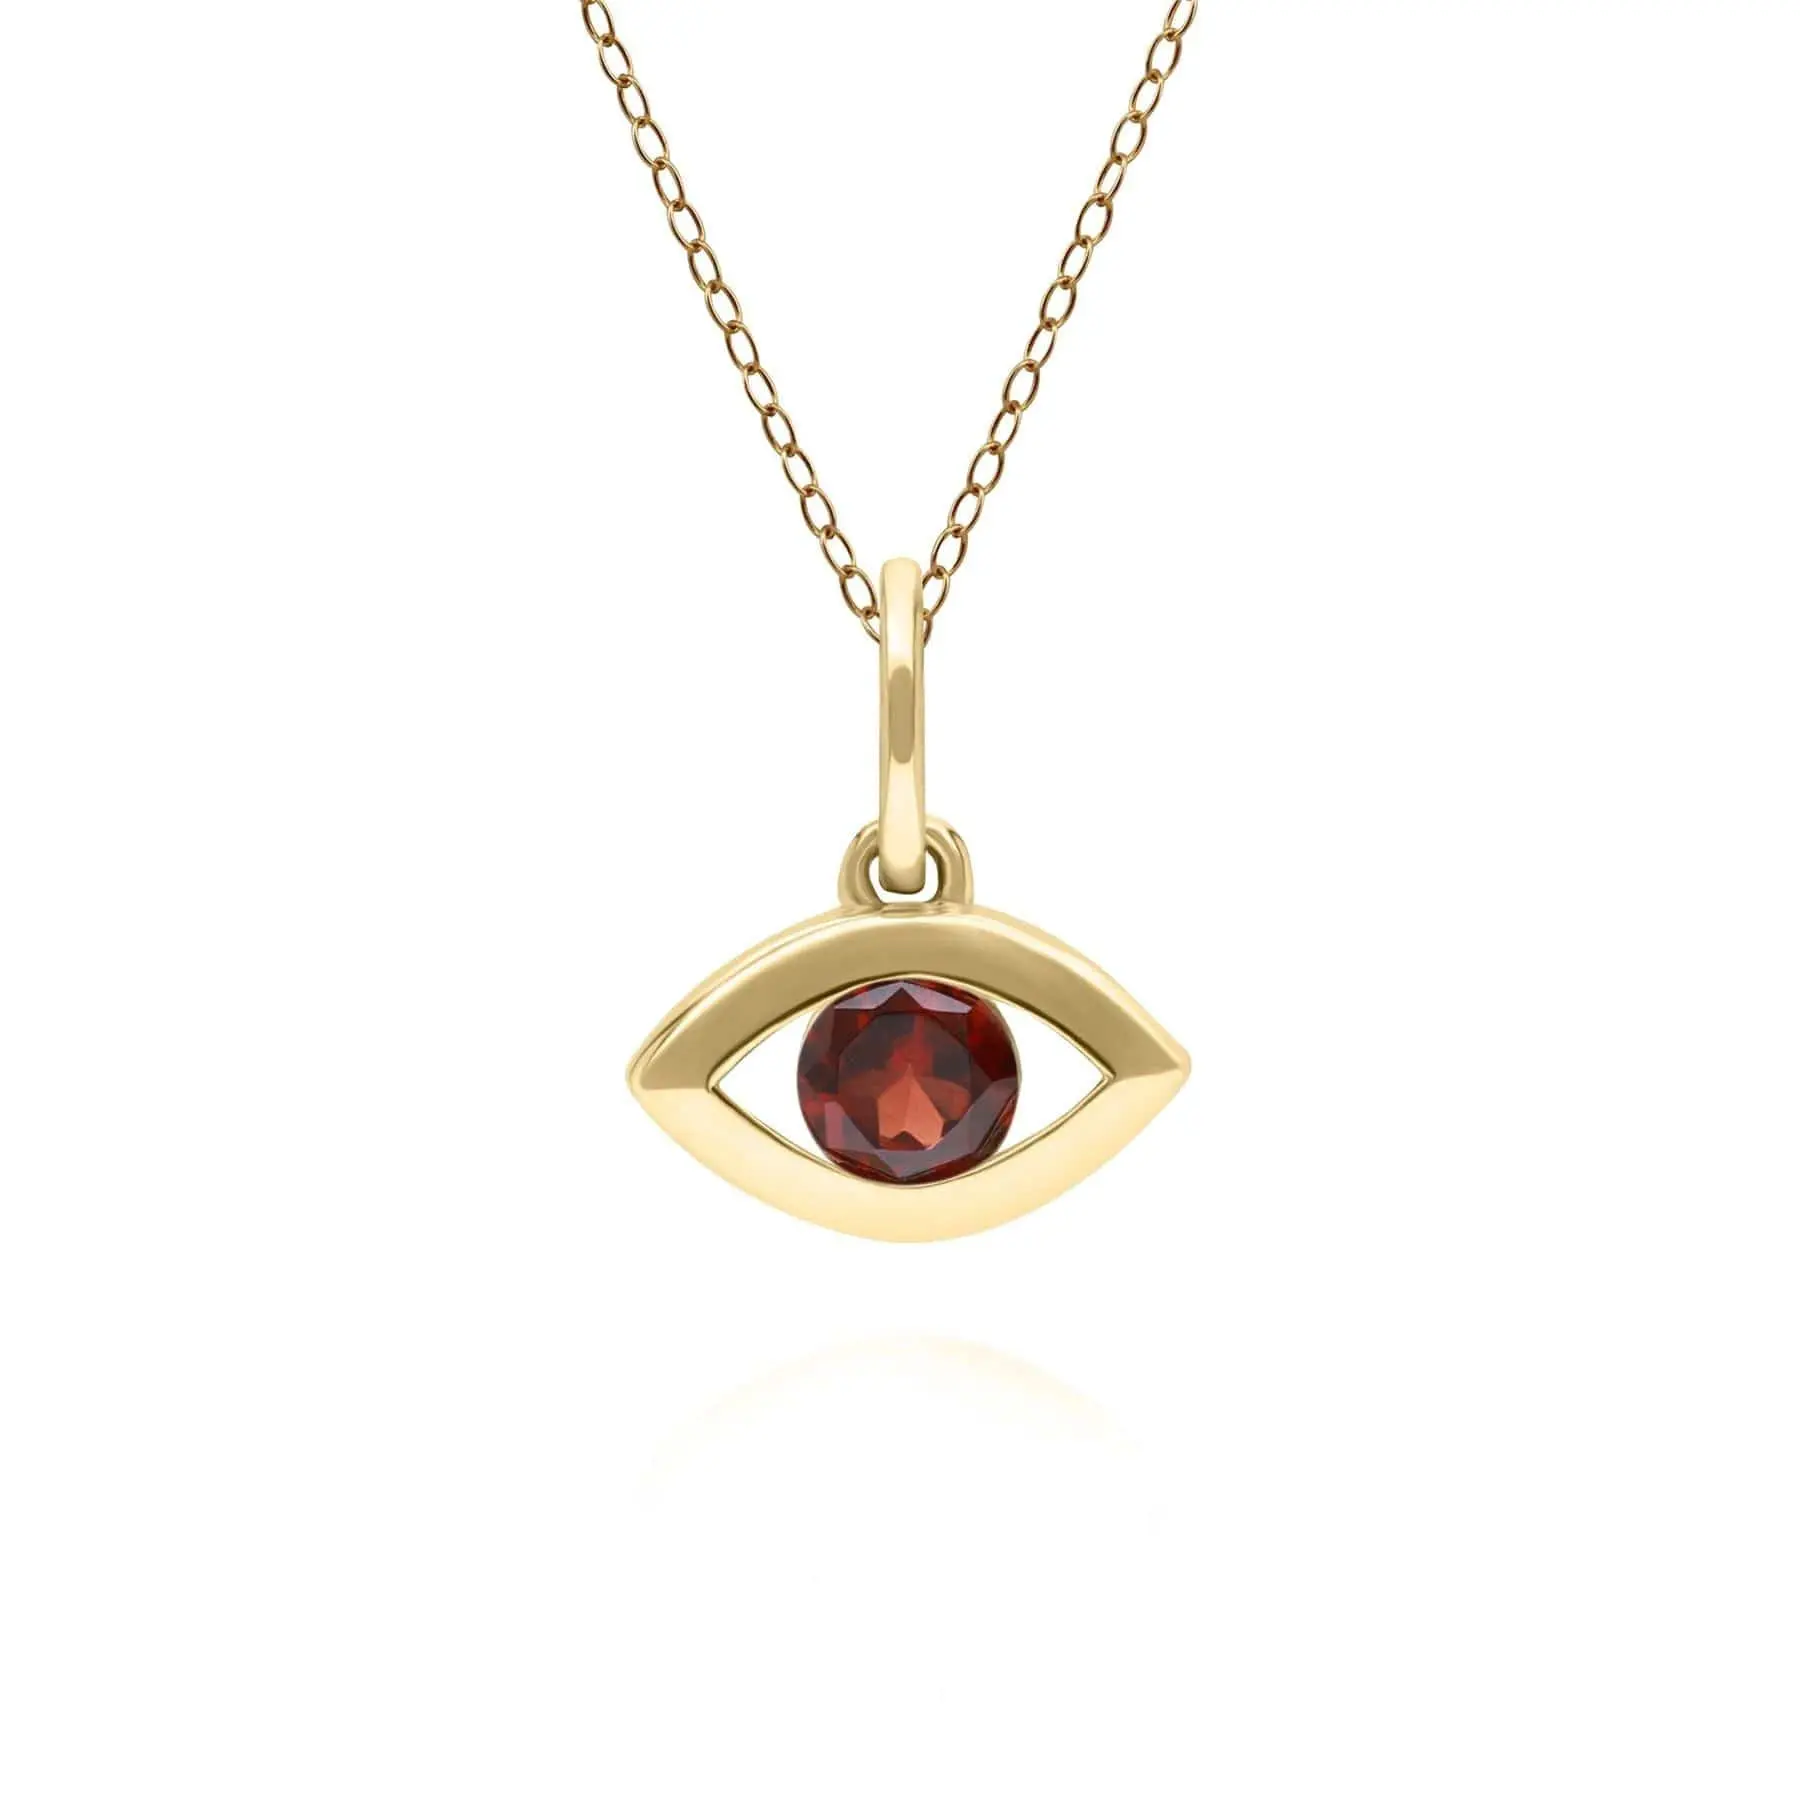 Vintage Stainless Steel Collar Chain with Gold Plated Devil's Eye Pendant Necklace Emerald Garnet Eye Necklace for Women